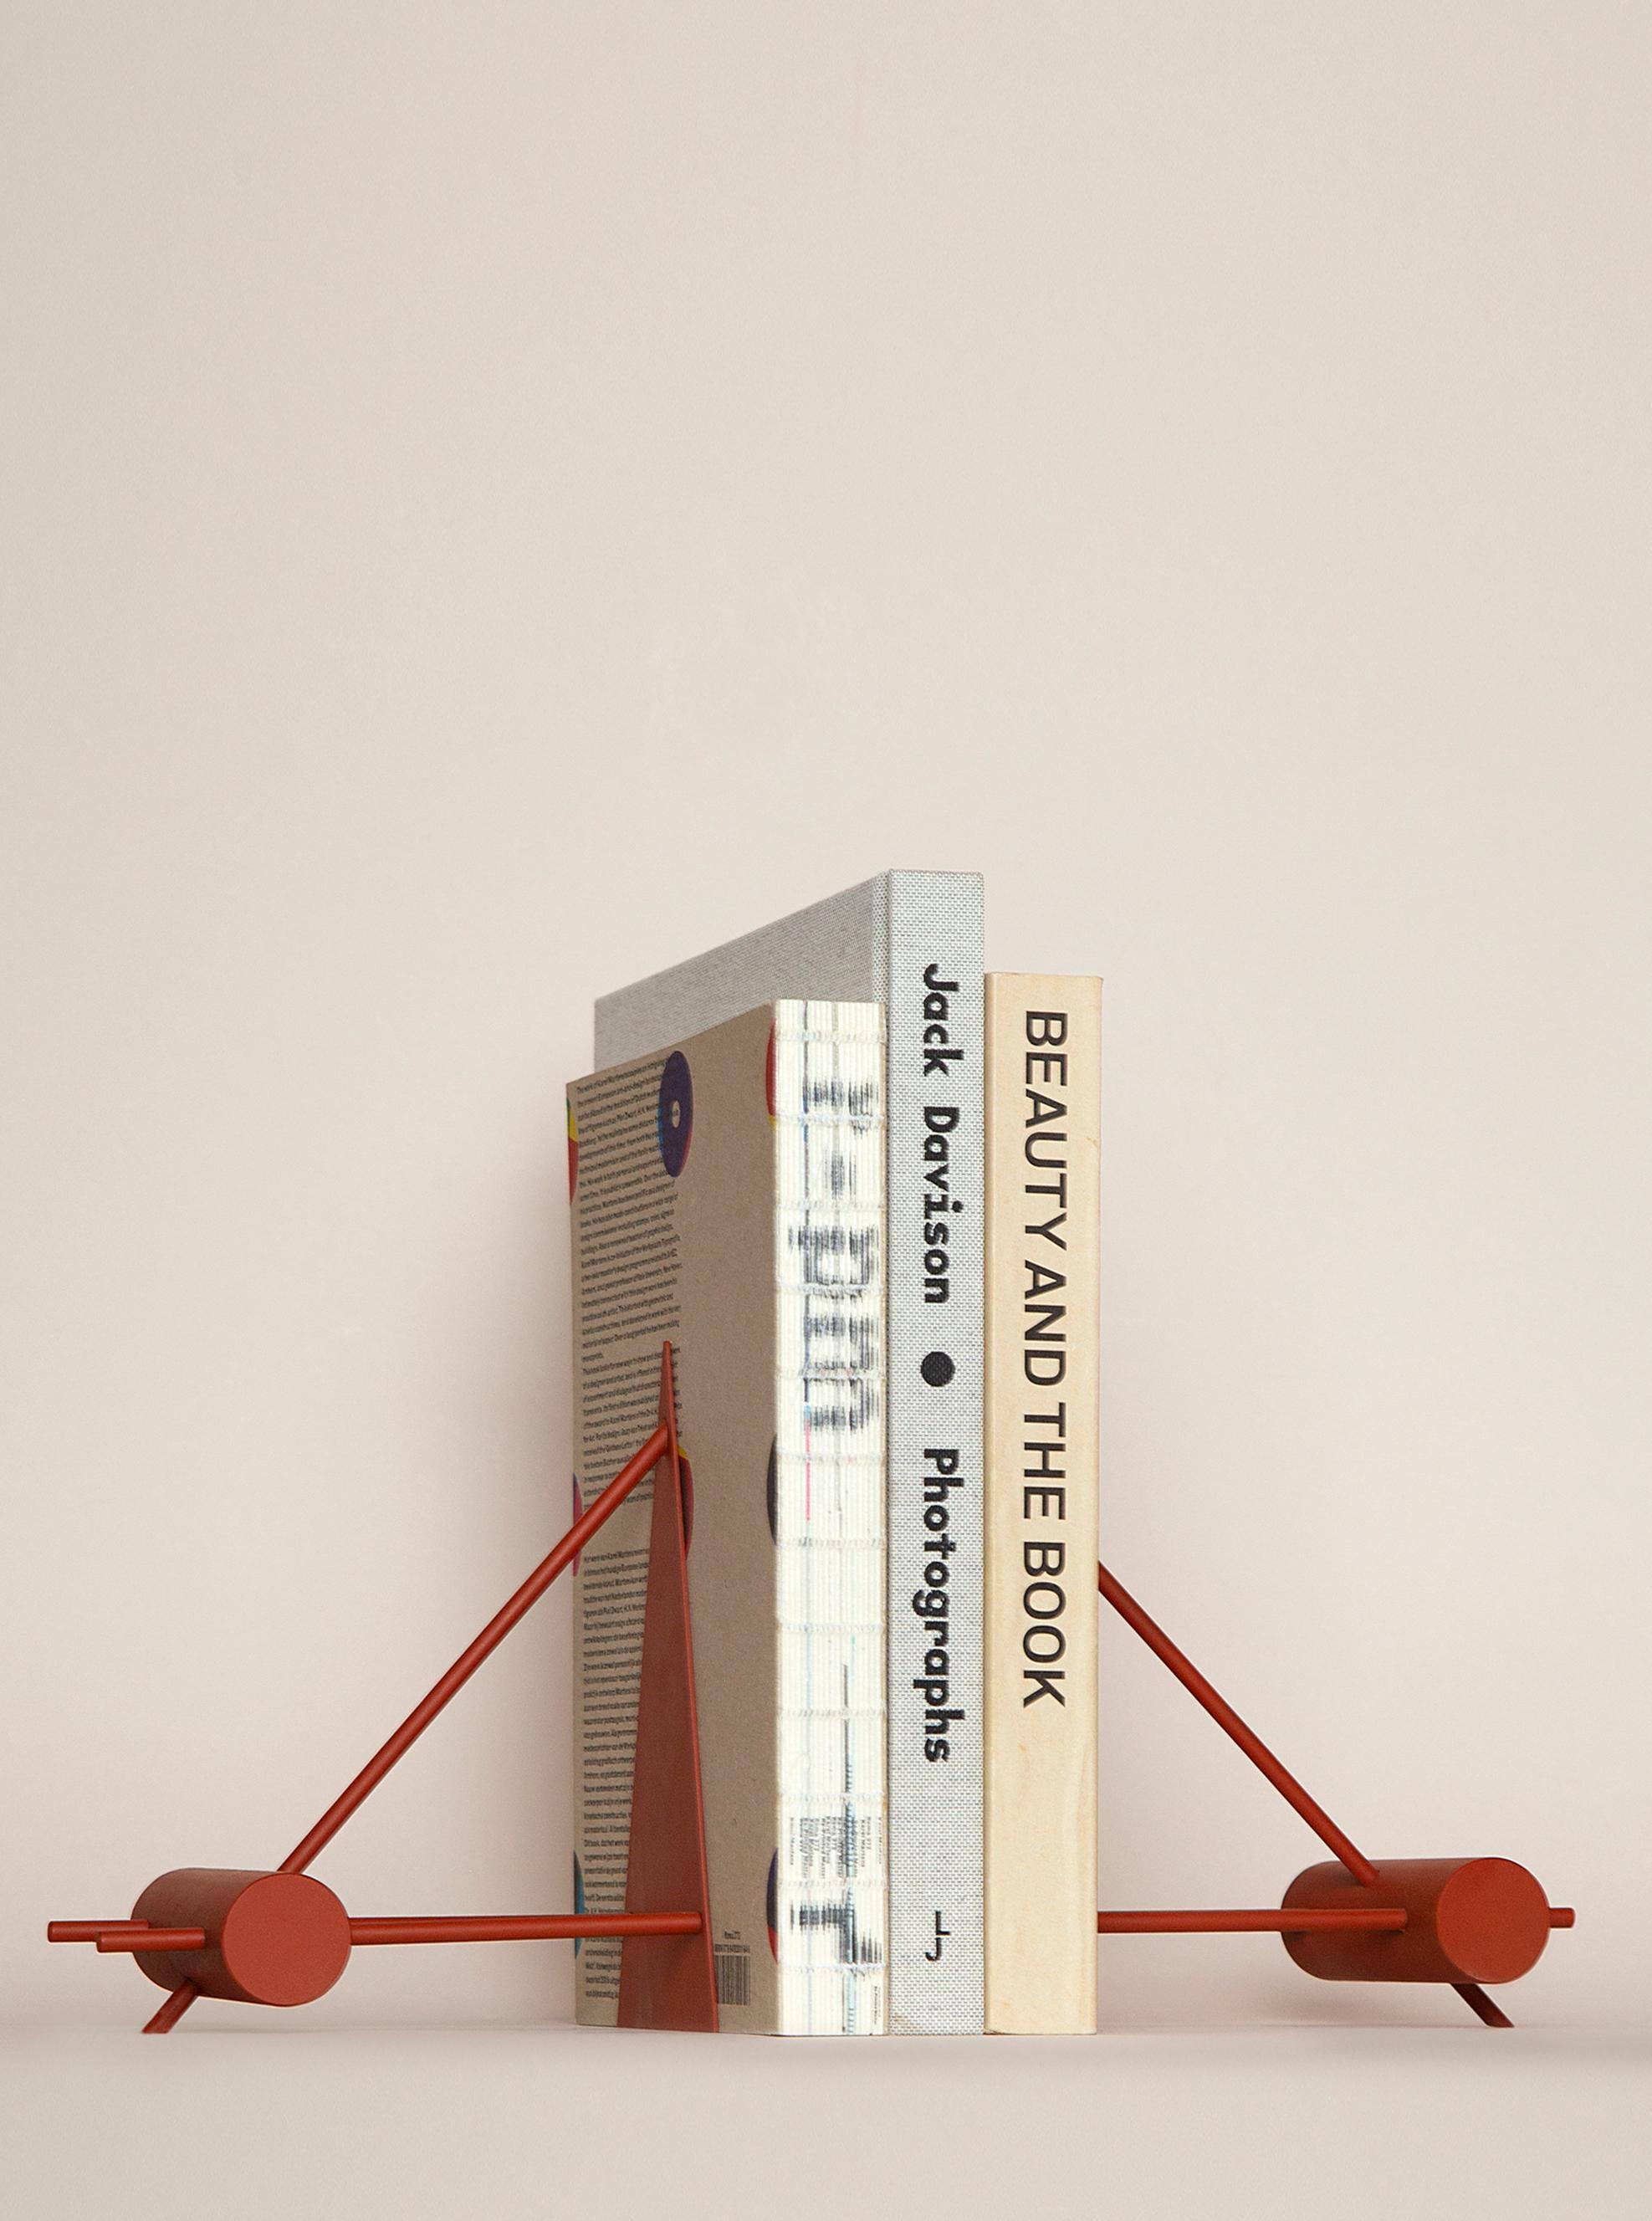 These bookends are made of iron.
Inspired by a suspension bridge.
